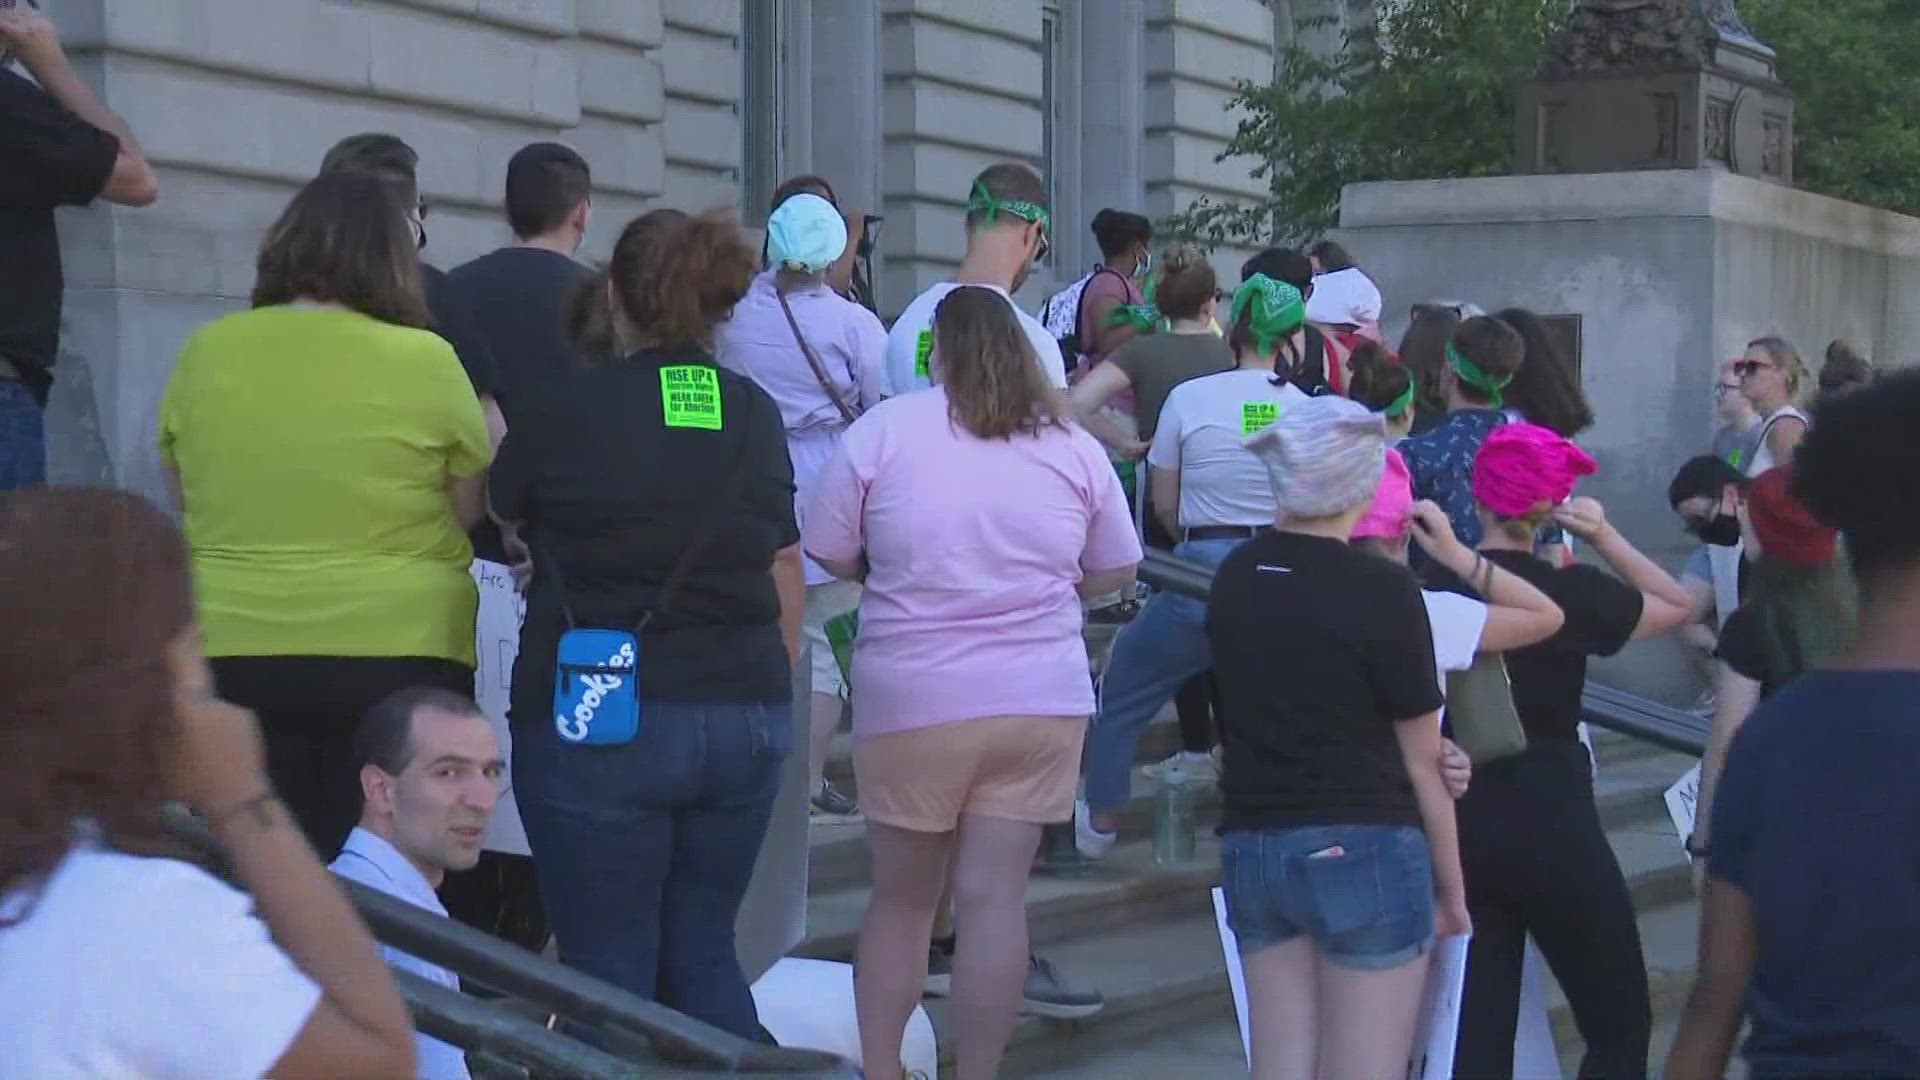 Advocates for abortion rights are scheduled to gather in Downtown Cleveland next to City Hall.